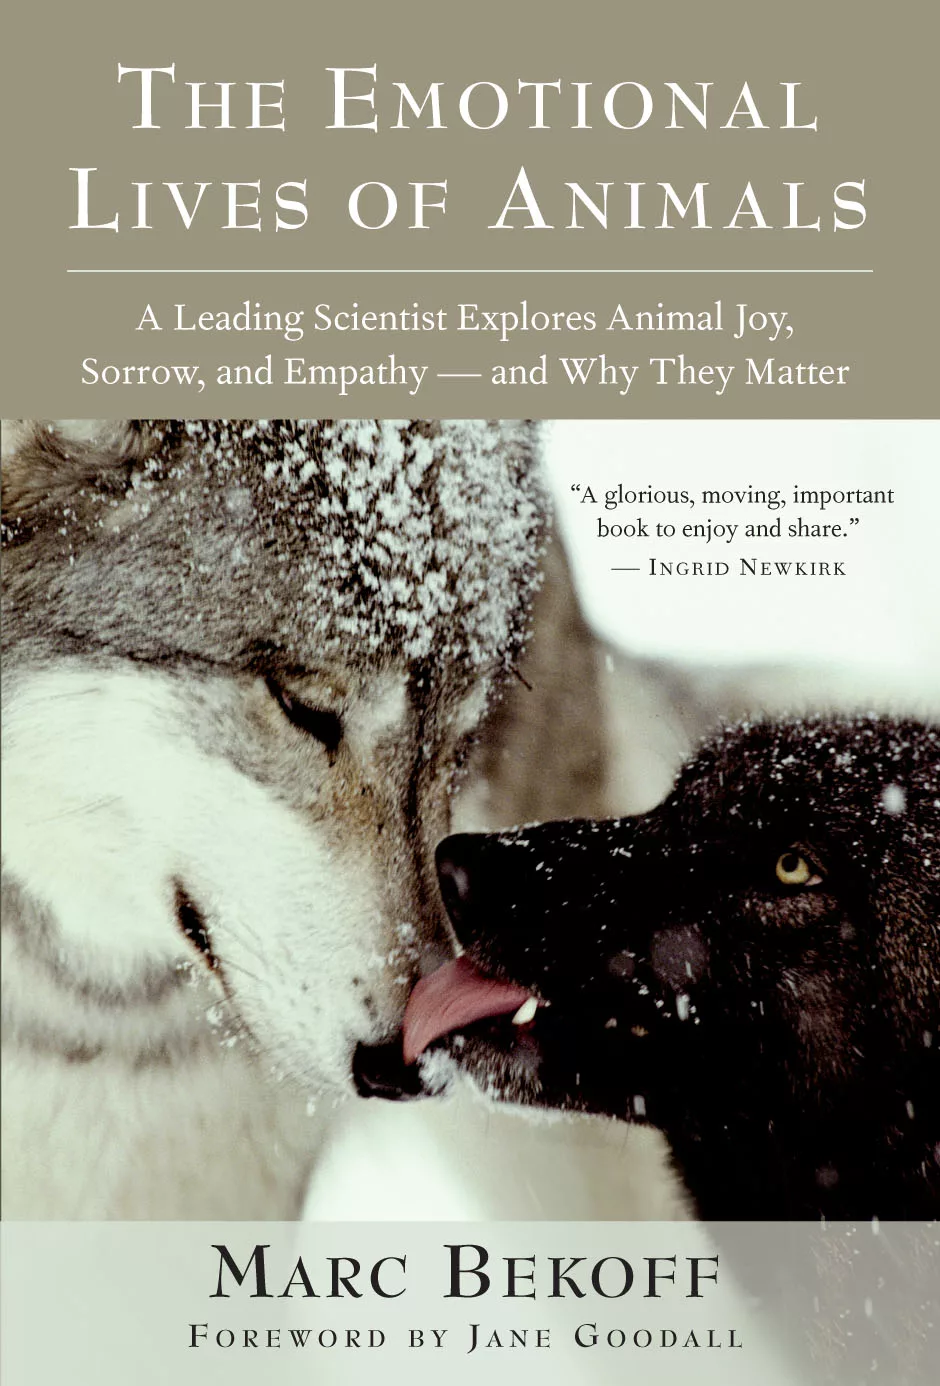 337: Dr. Marc Bekoff, Author: “Animals and Emotions”